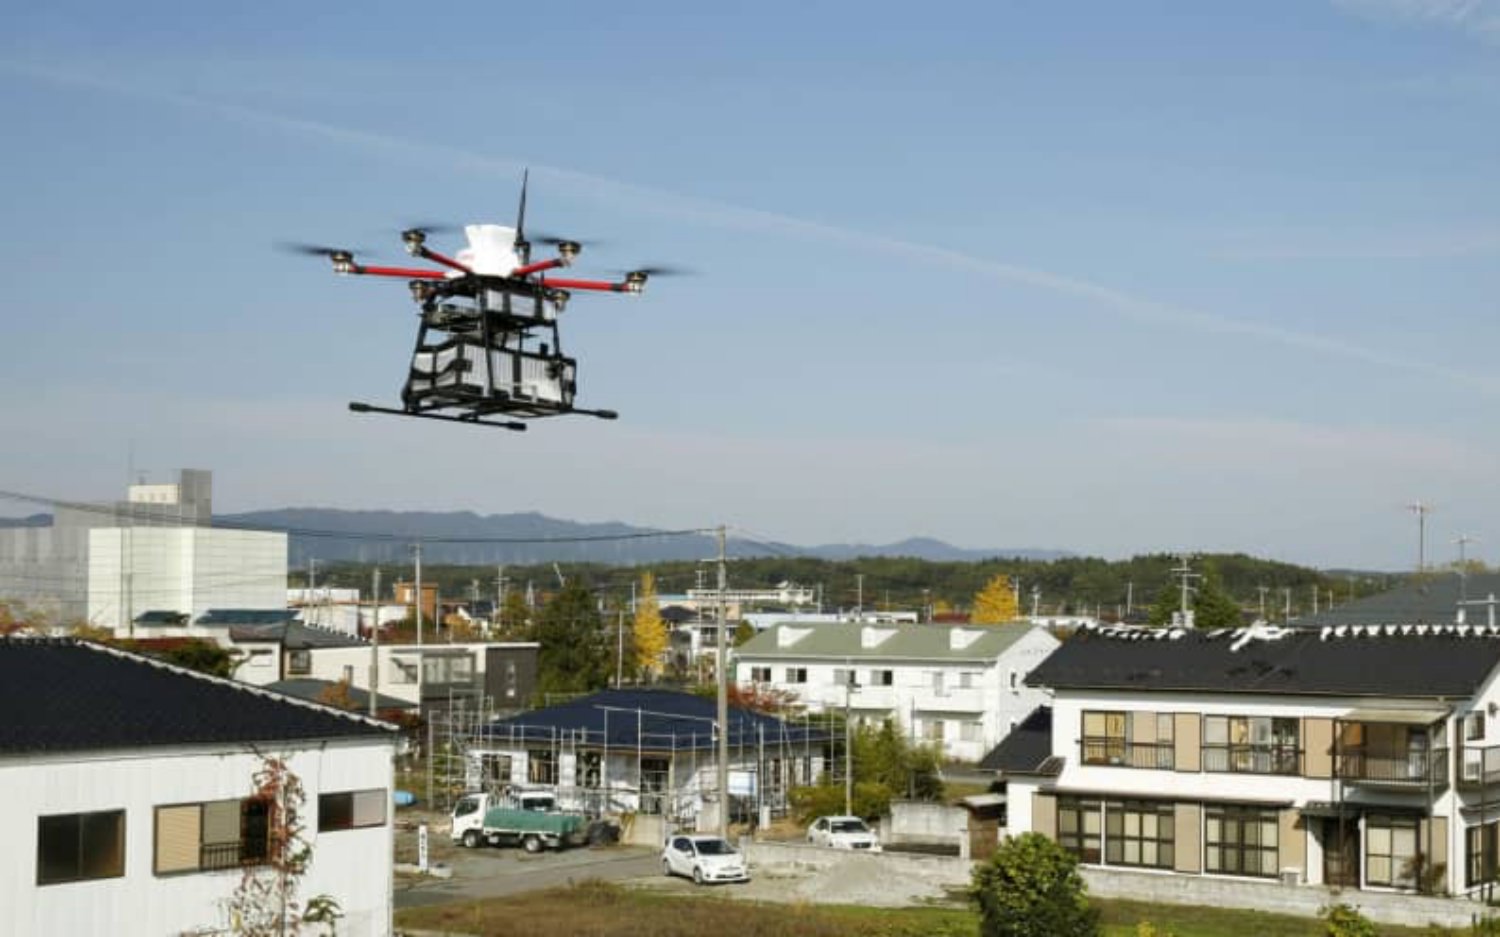 Drone document delivery service launched in Fukushima, Japan